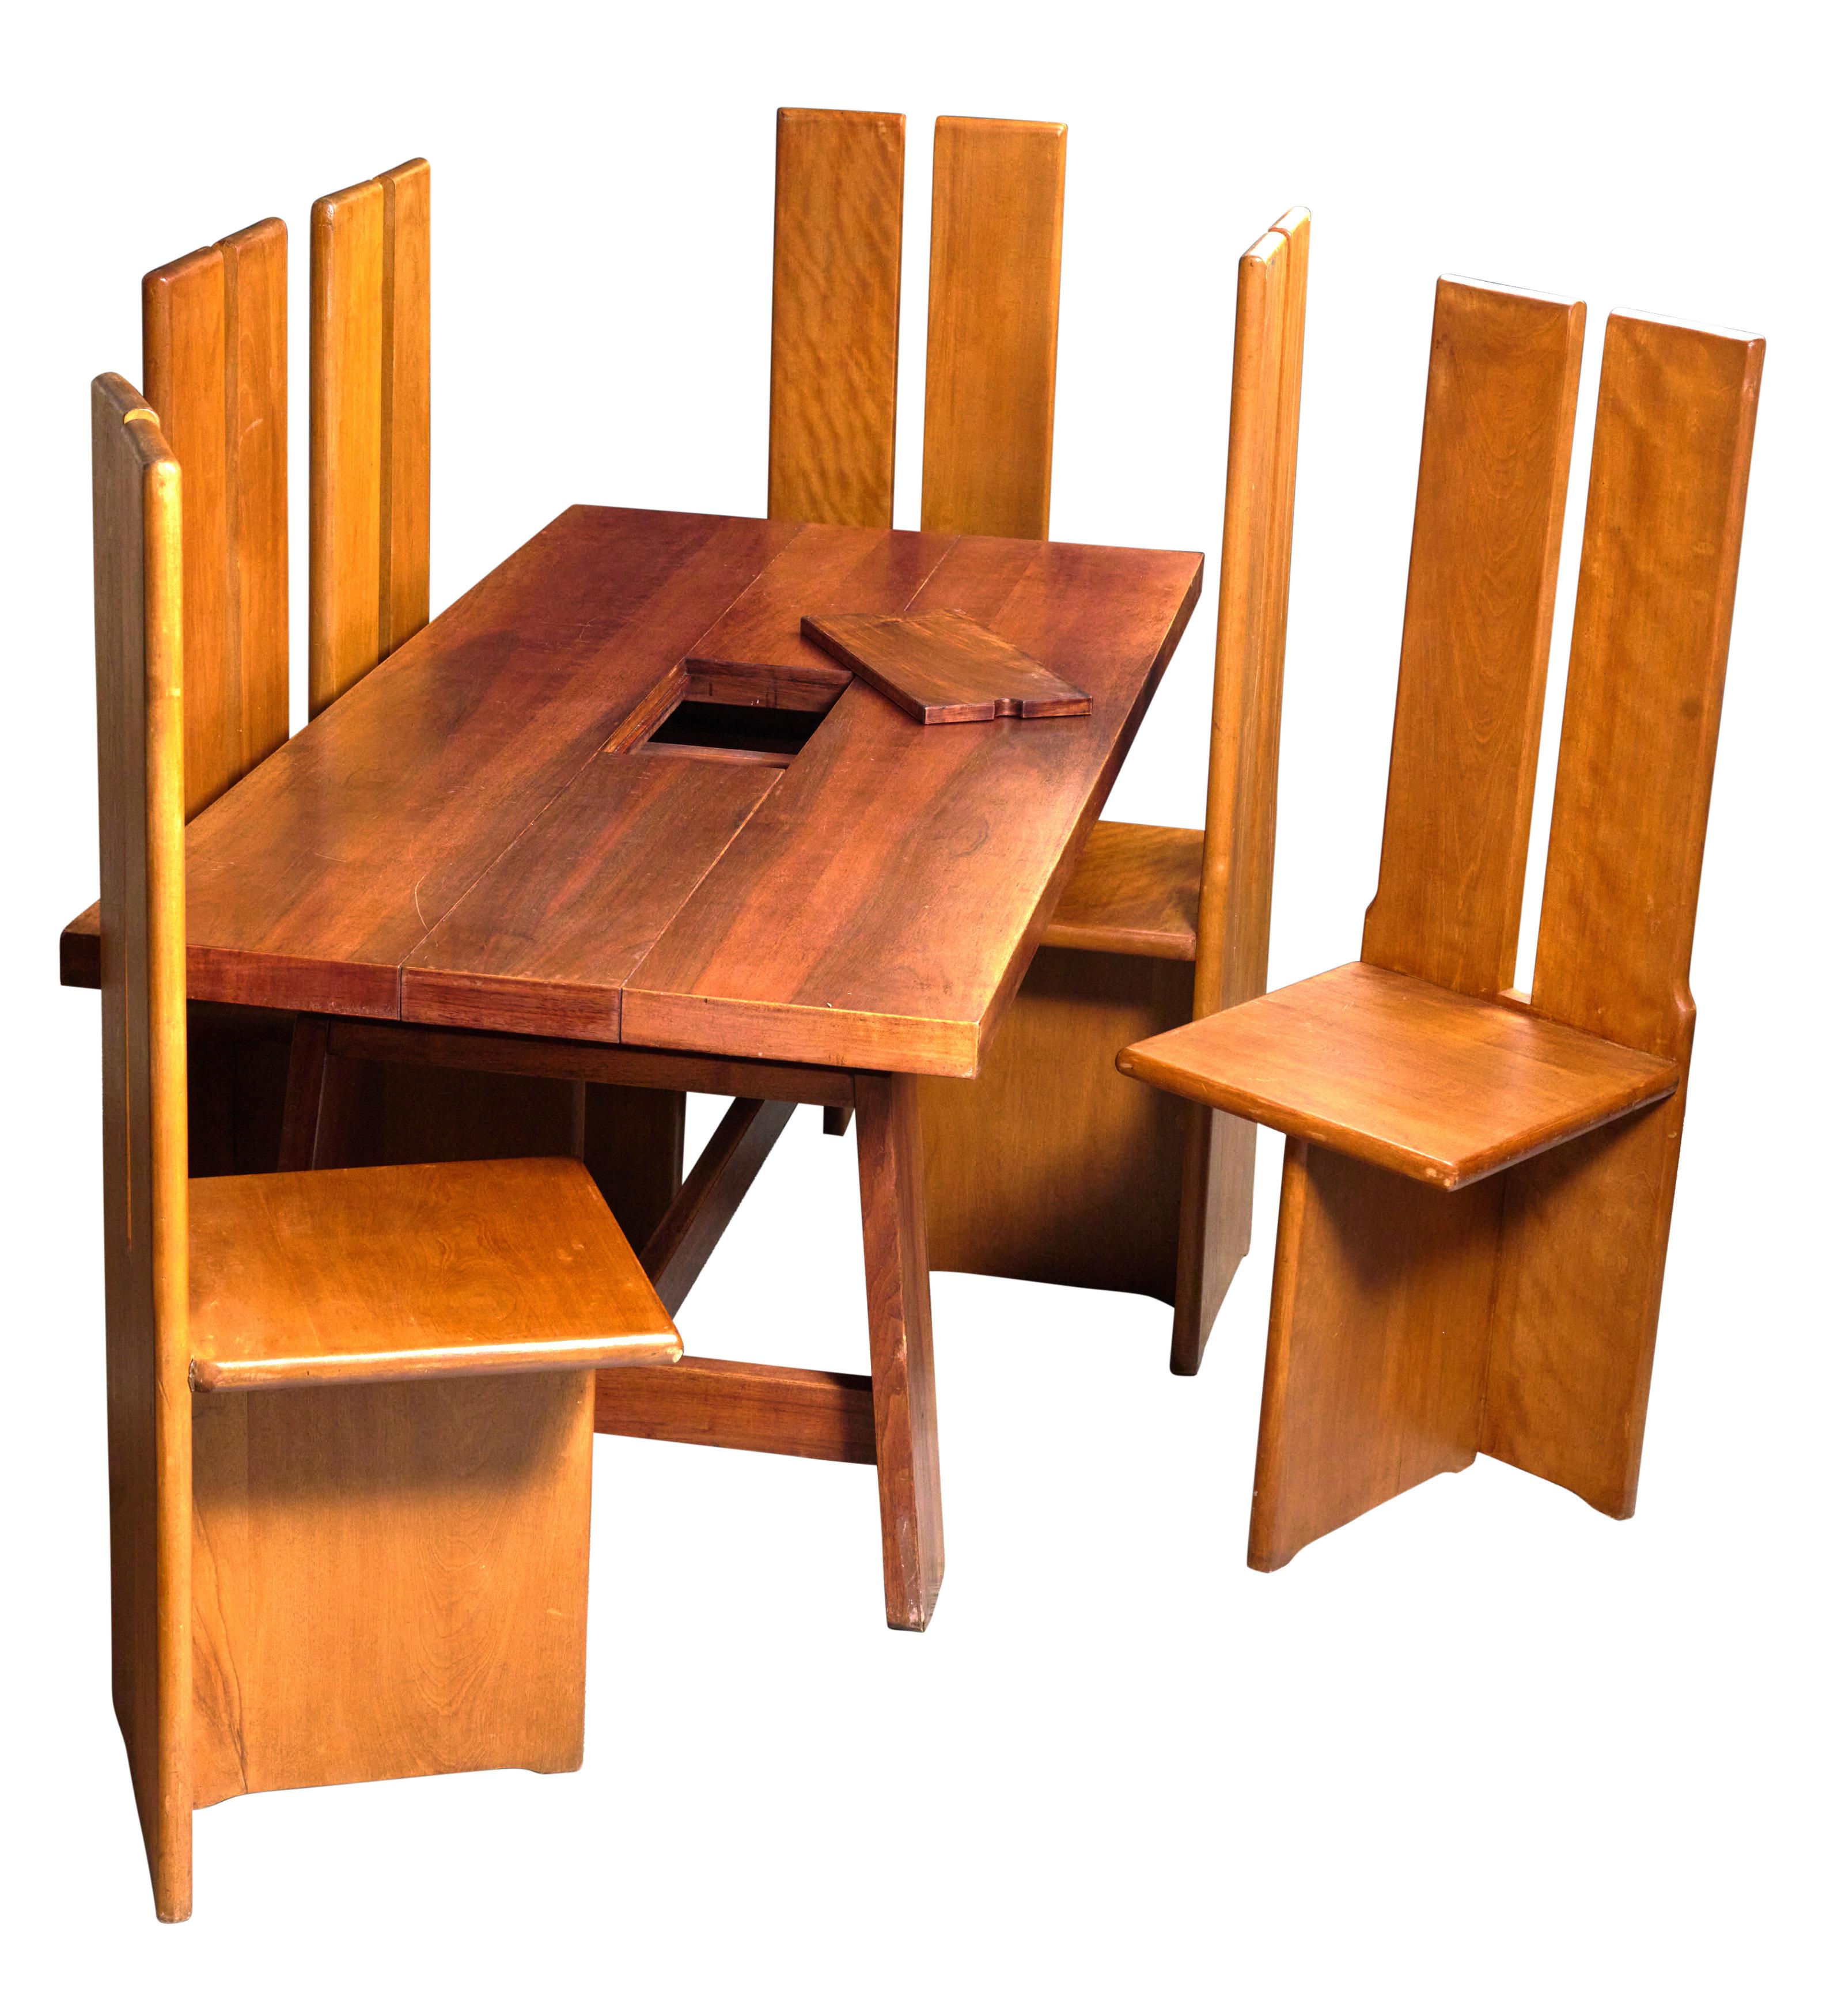 Mid century dining table and six chairs with lift off utensils storage. Excellent design. Great condition. 

H 48” W 75” D 34.25